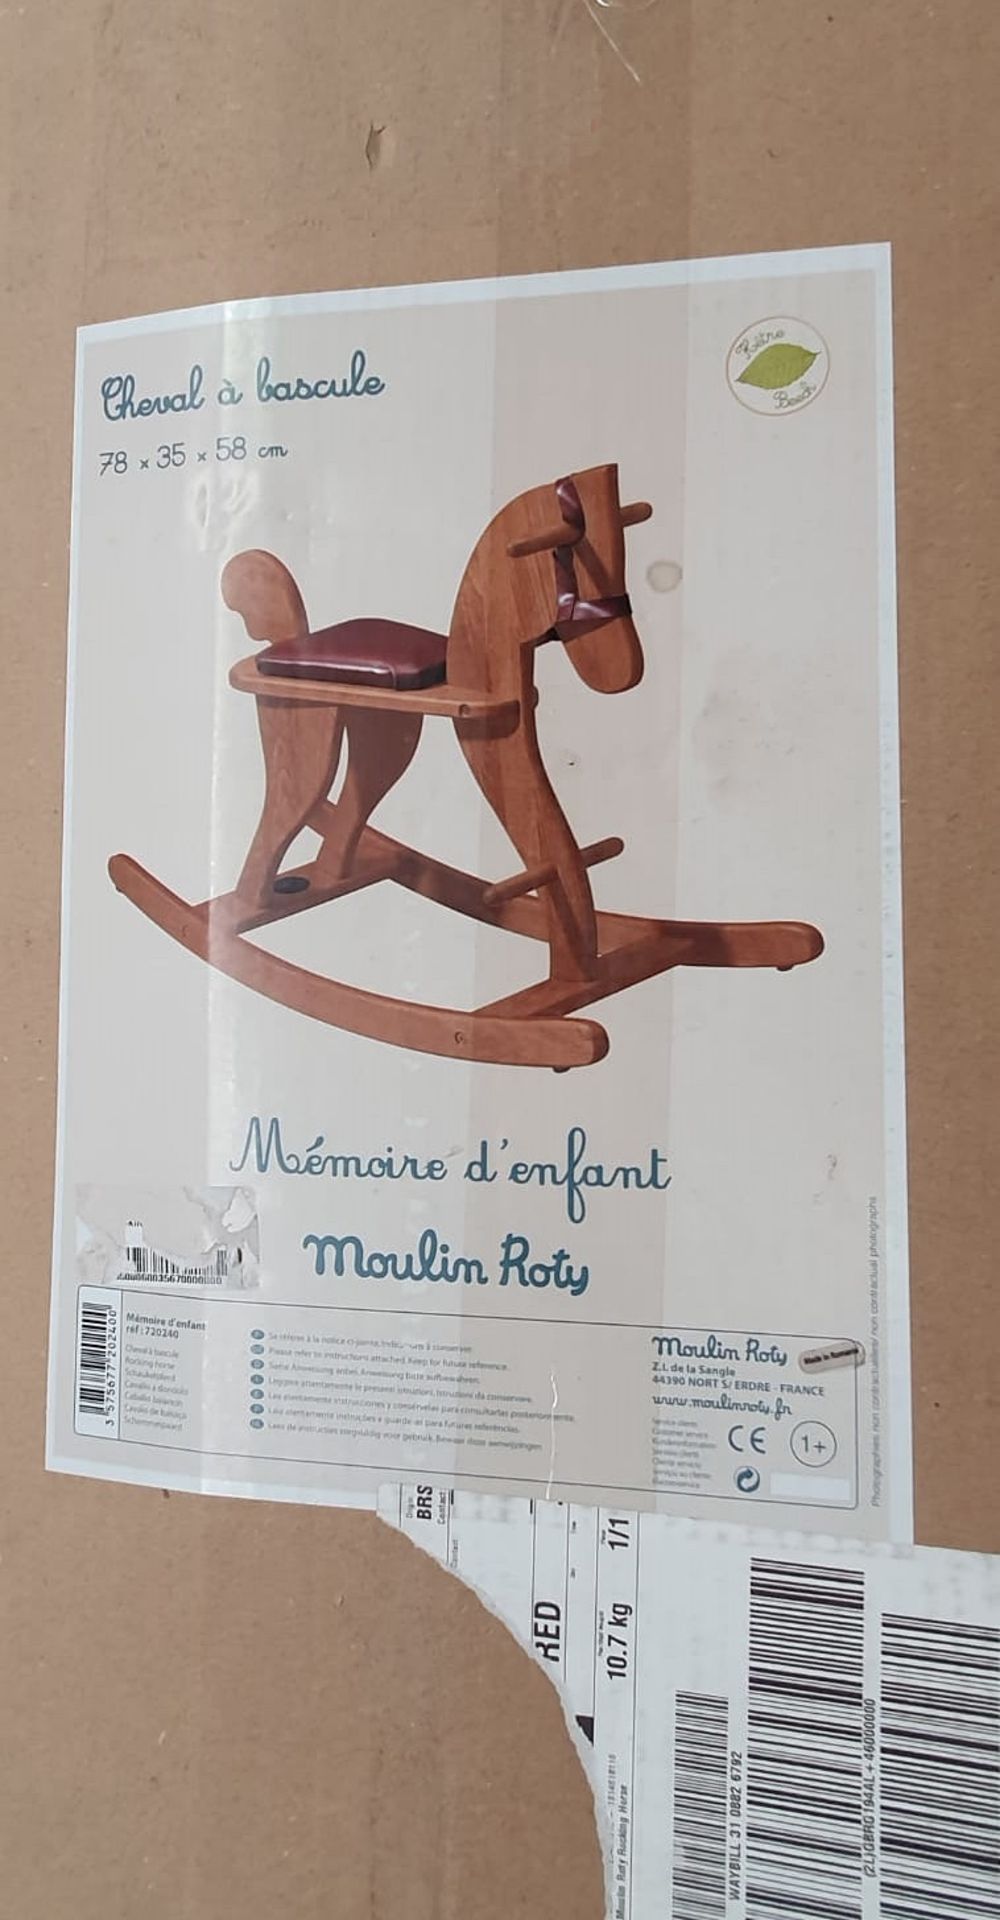 1 x MOULIN ROTY Luxury Wooden Rocking Horse - Original Price £129.00 - Unused Boxed Stock - Image 2 of 6